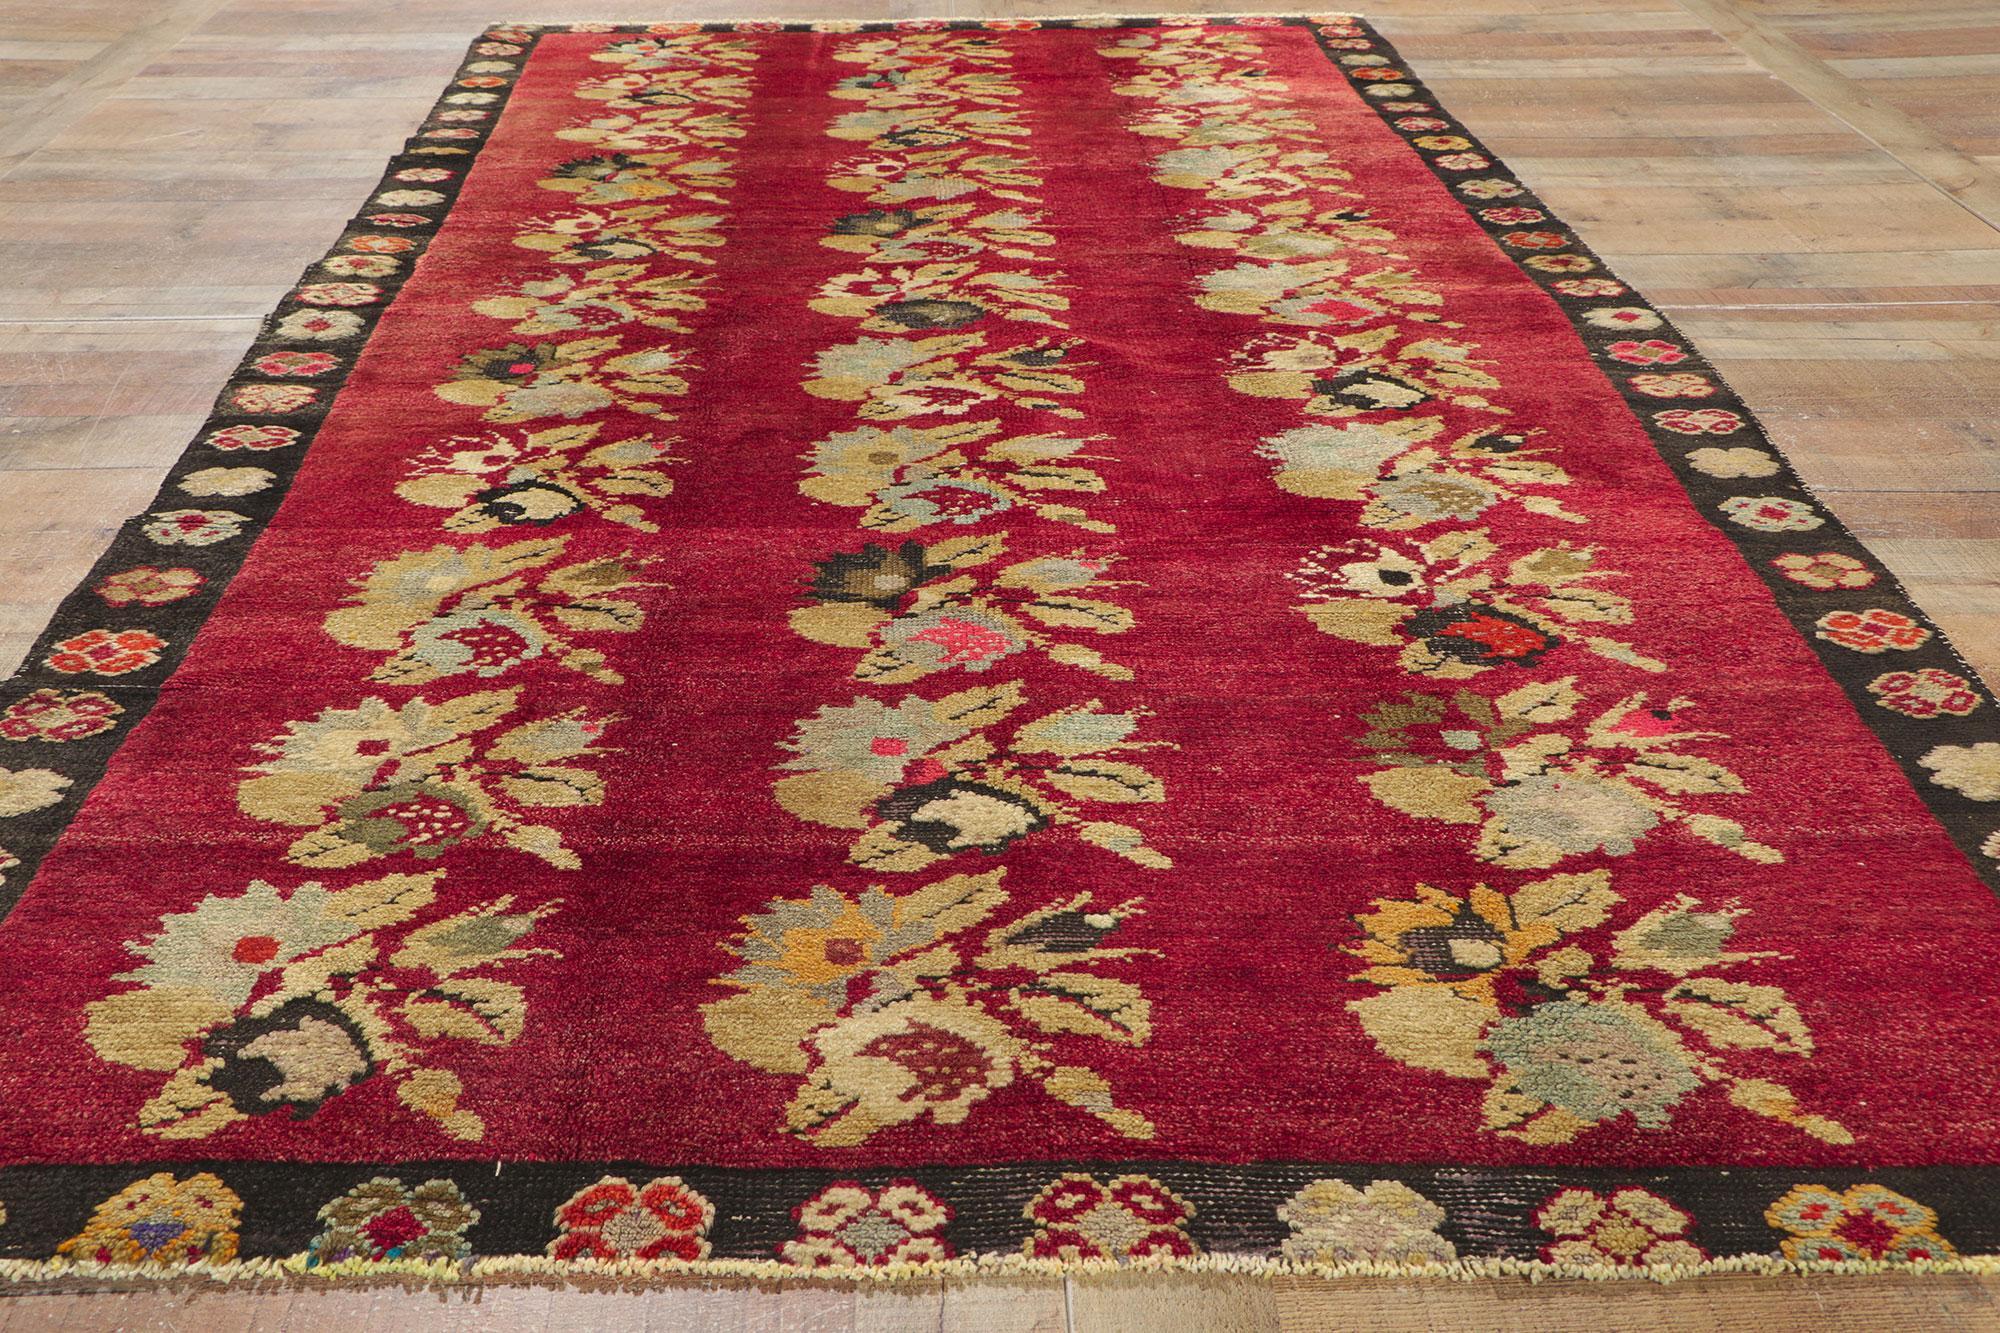 Vintage Red Turkish Oushak Rug with Lively Earth-Tone Colors In Good Condition For Sale In Dallas, TX